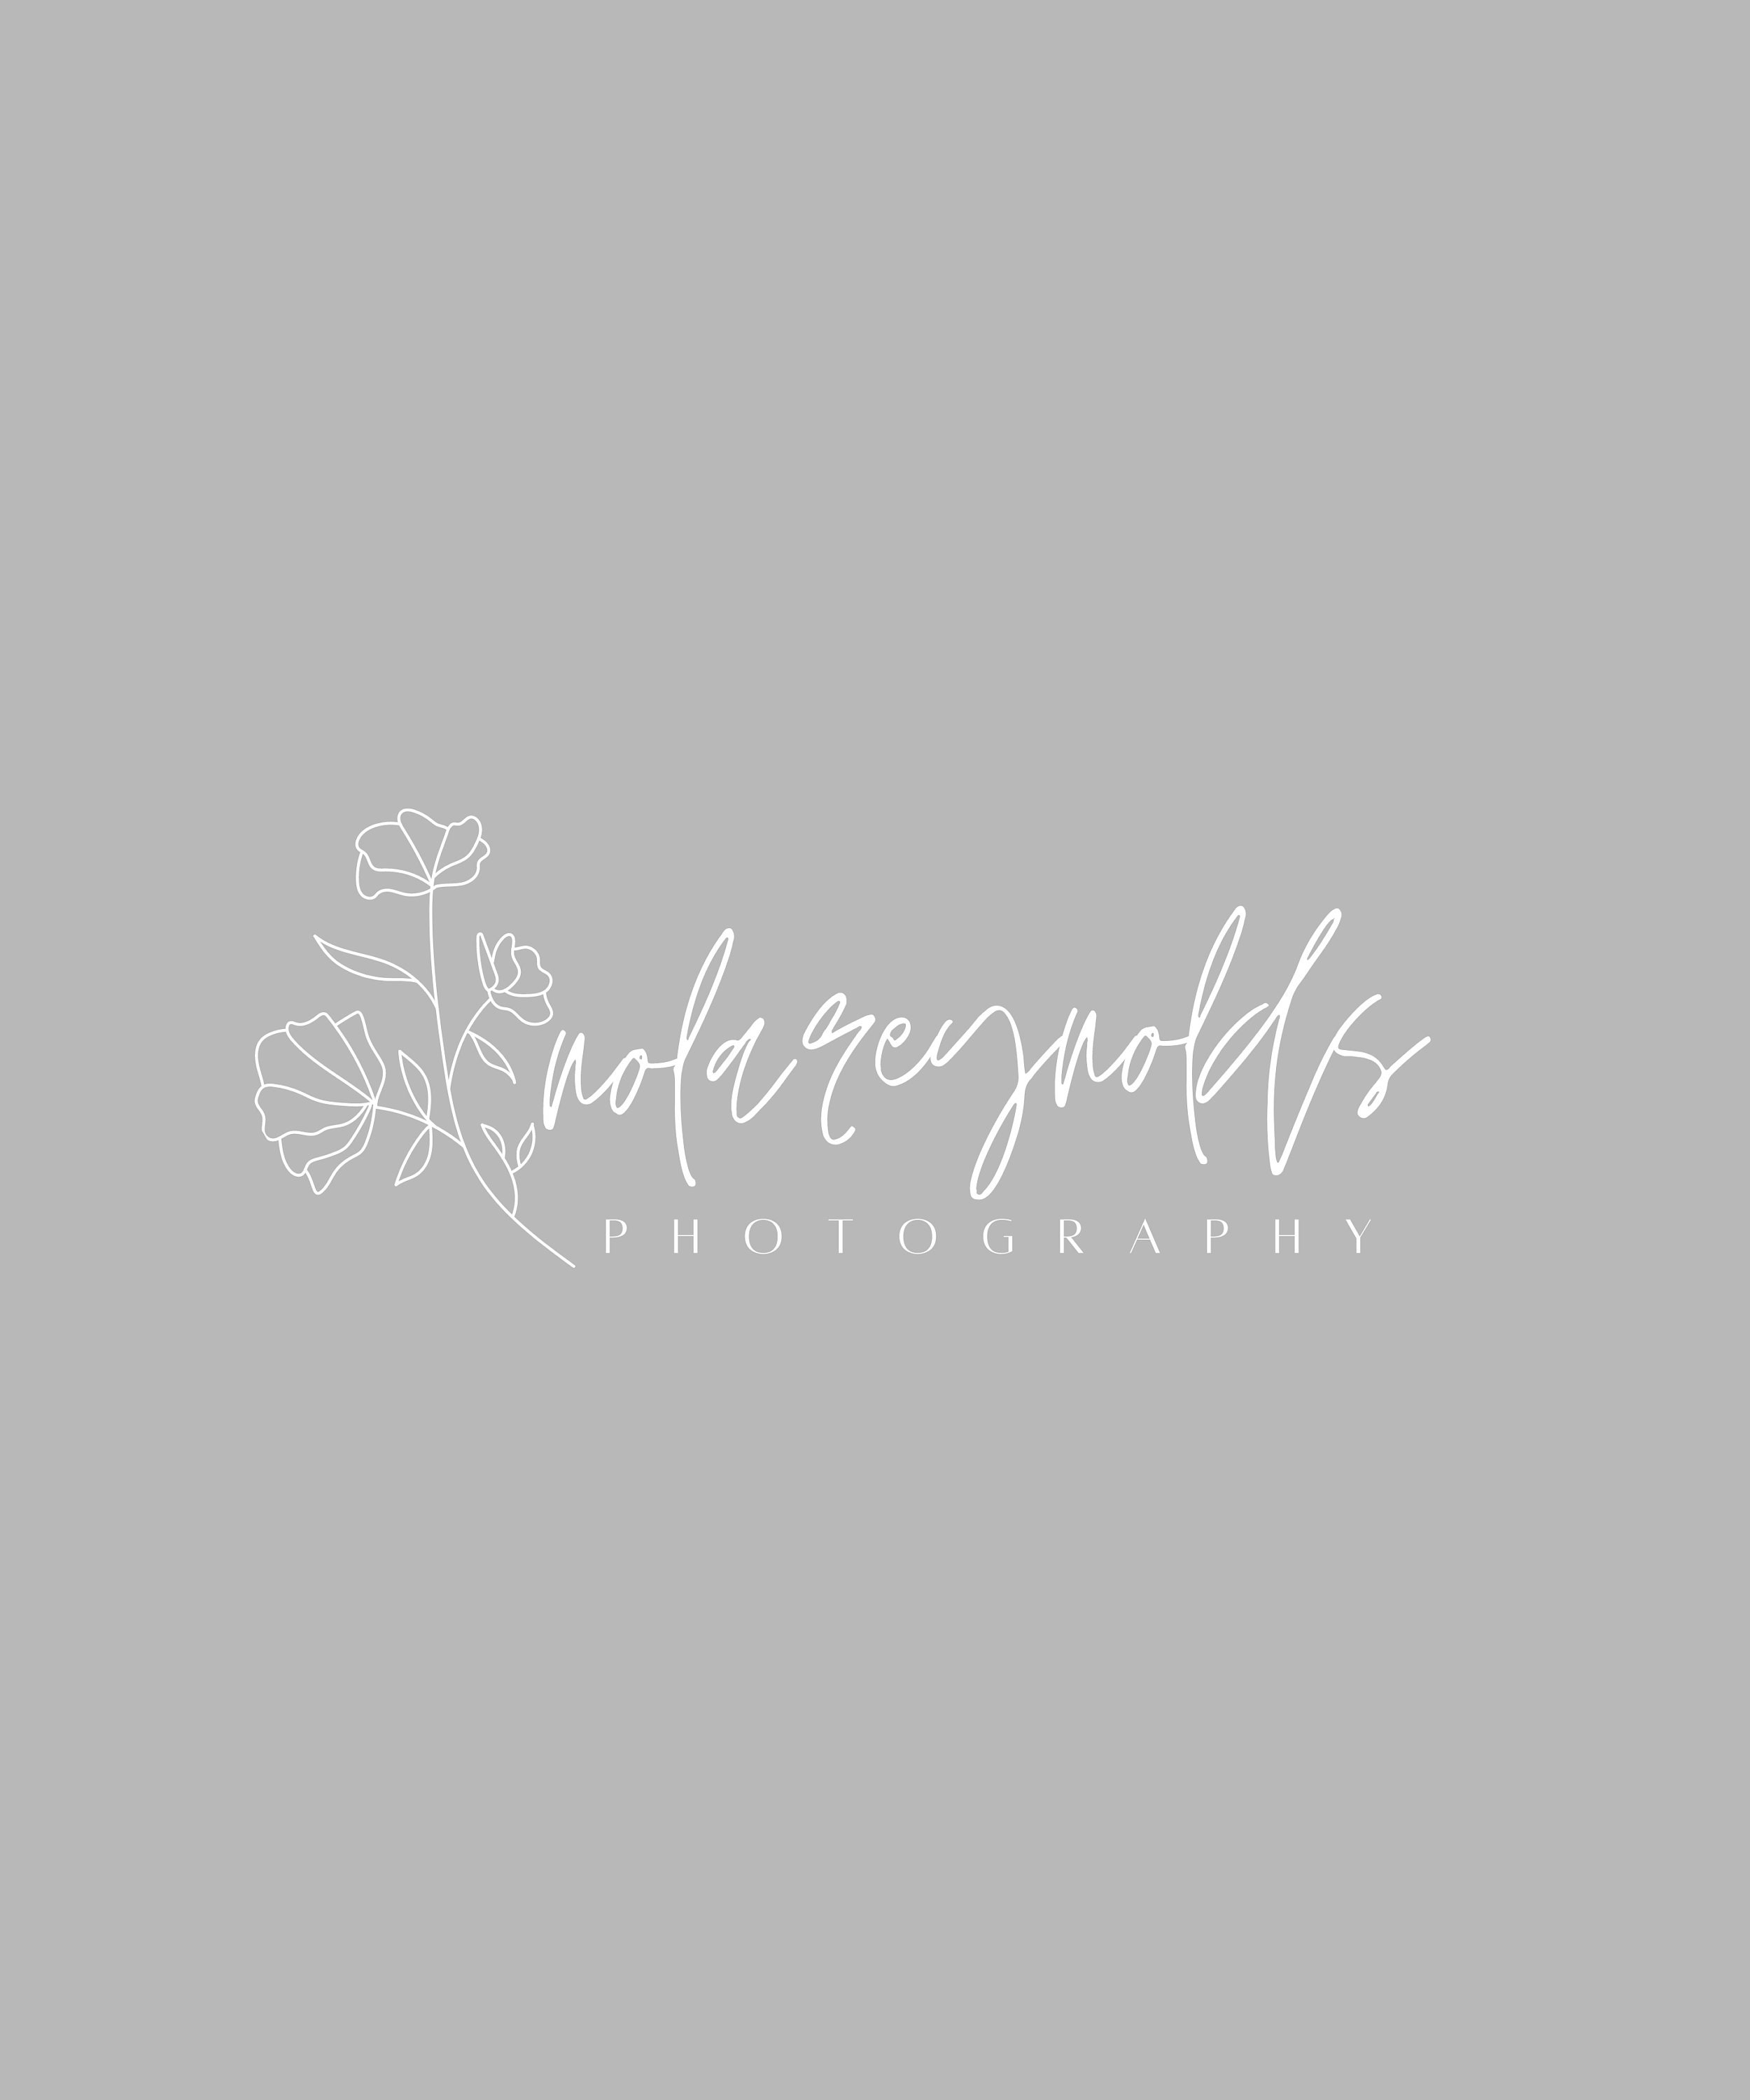 Premade Watermark Logo Instant Download Photography Logo - Etsy